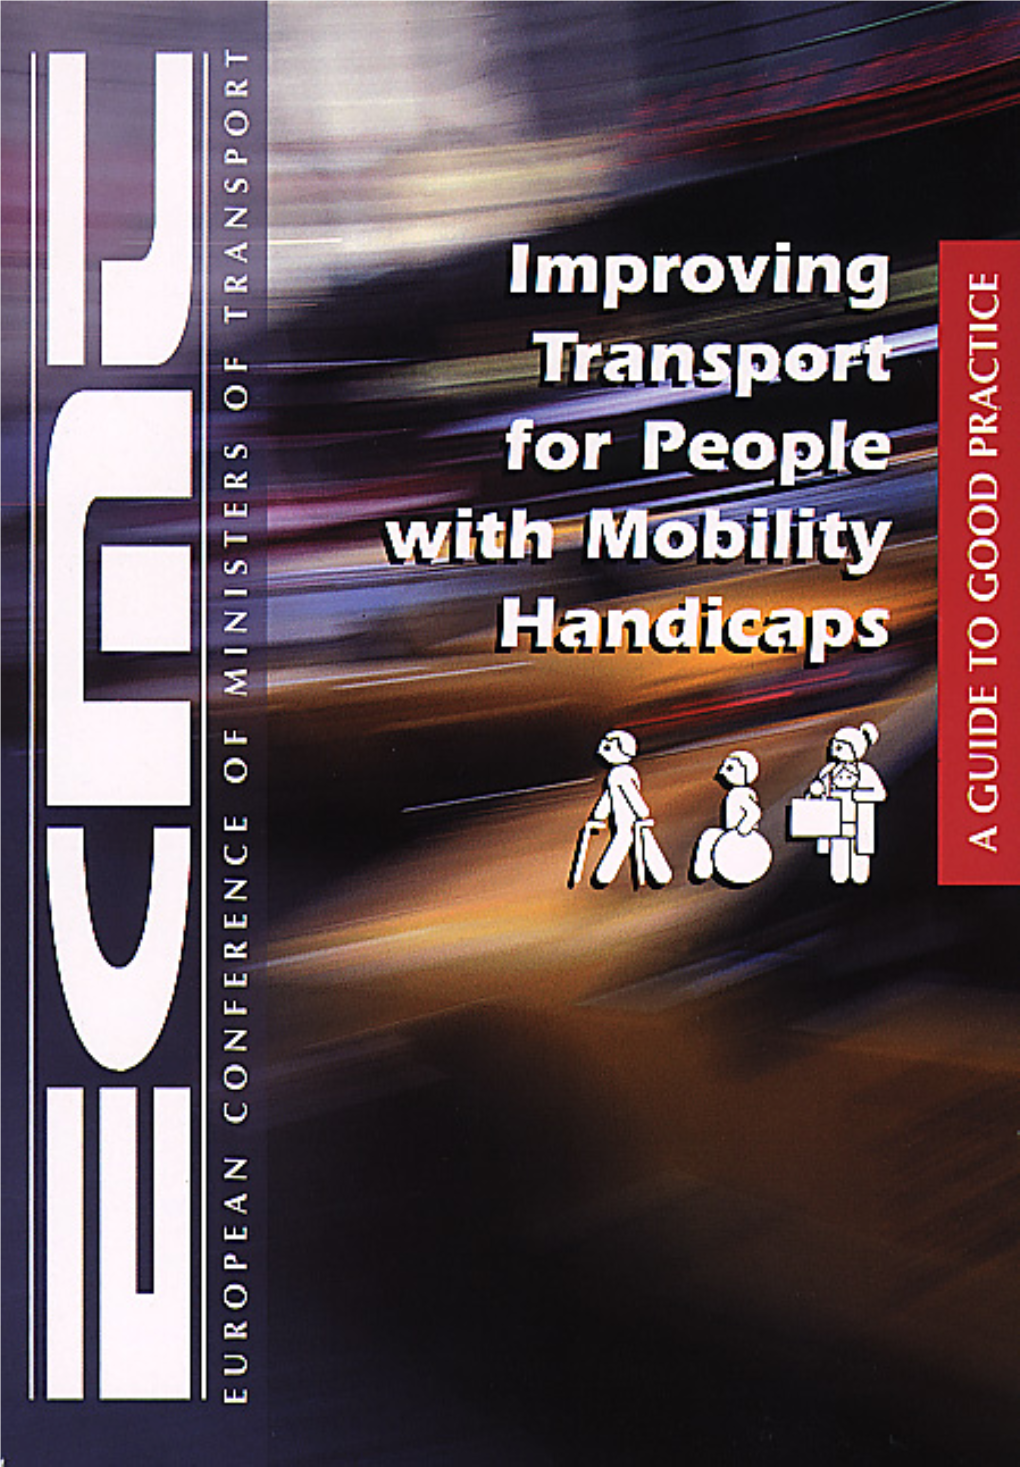 Improving Transport for People with Mobility Handicaps